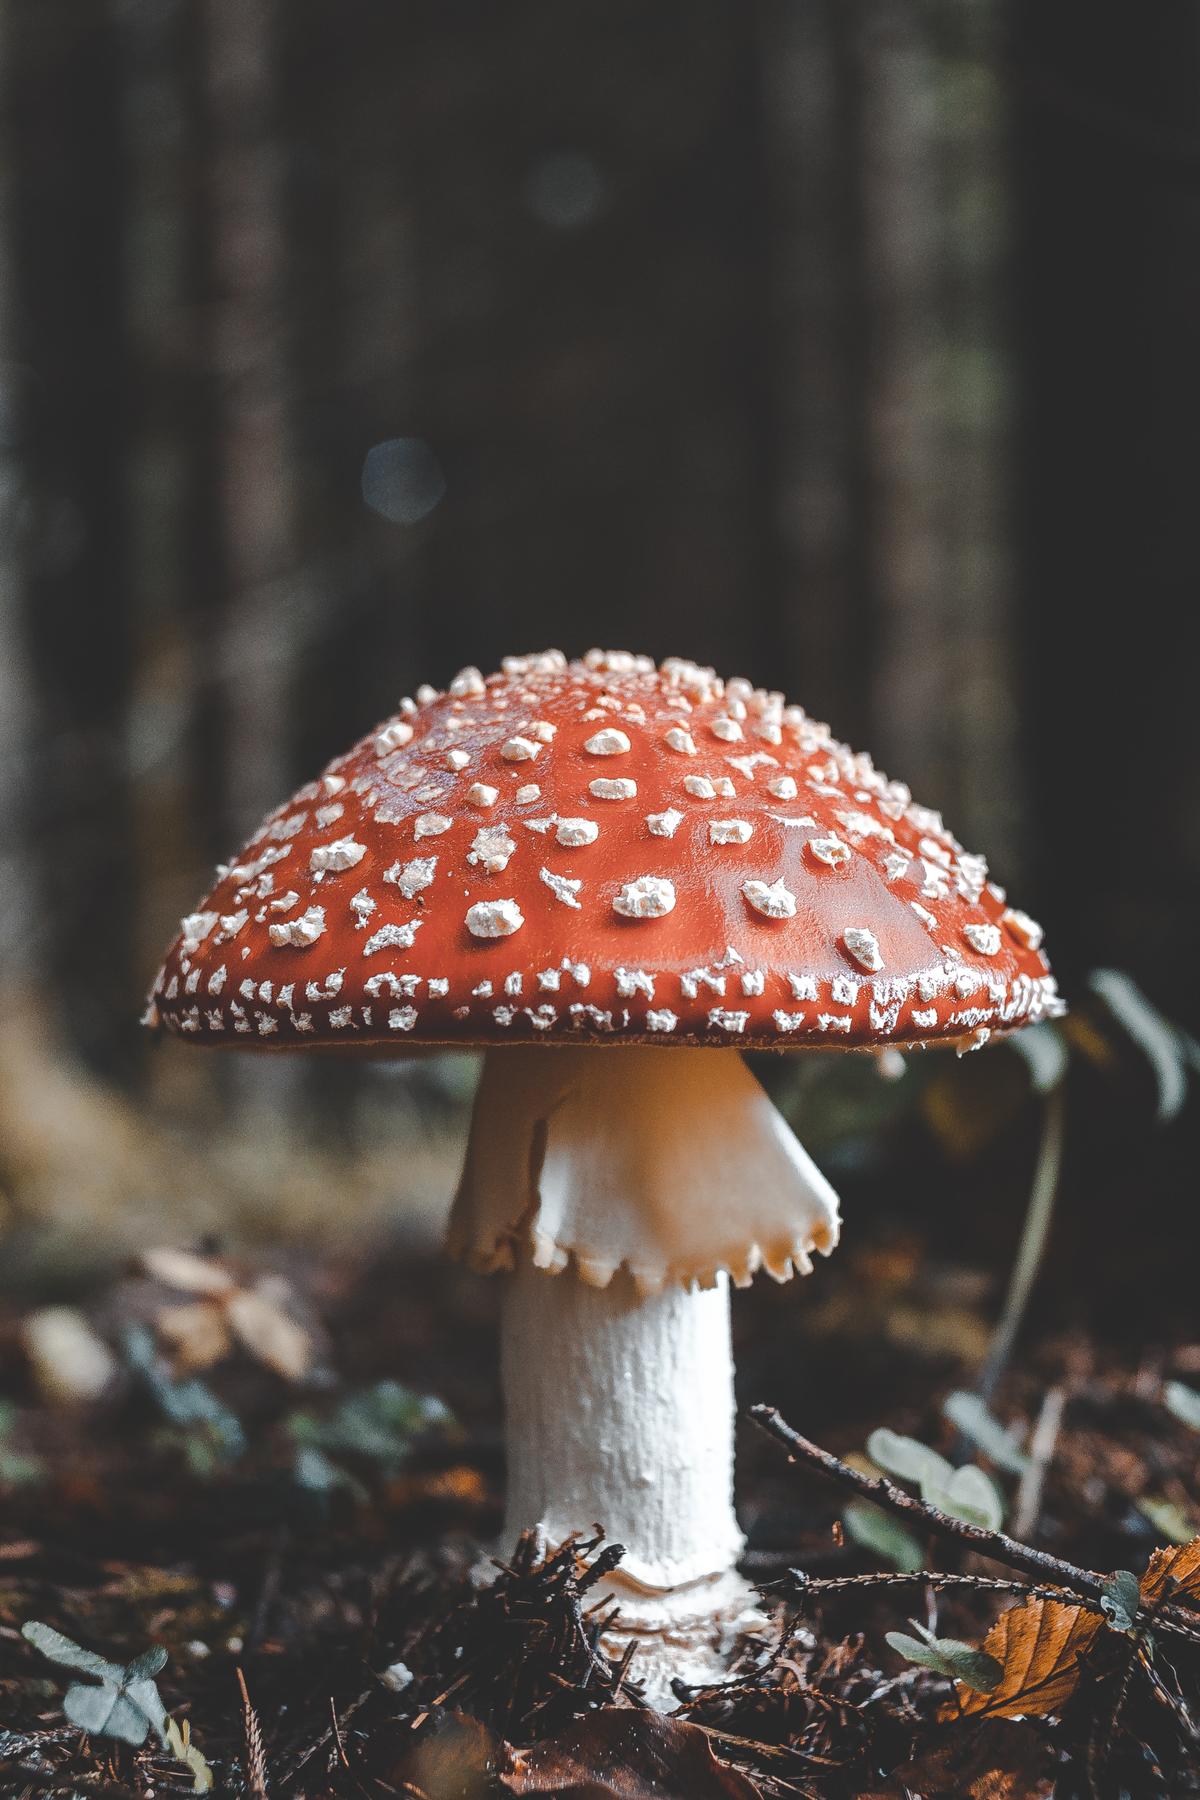 Close up of a mushroom growing on the forest floor